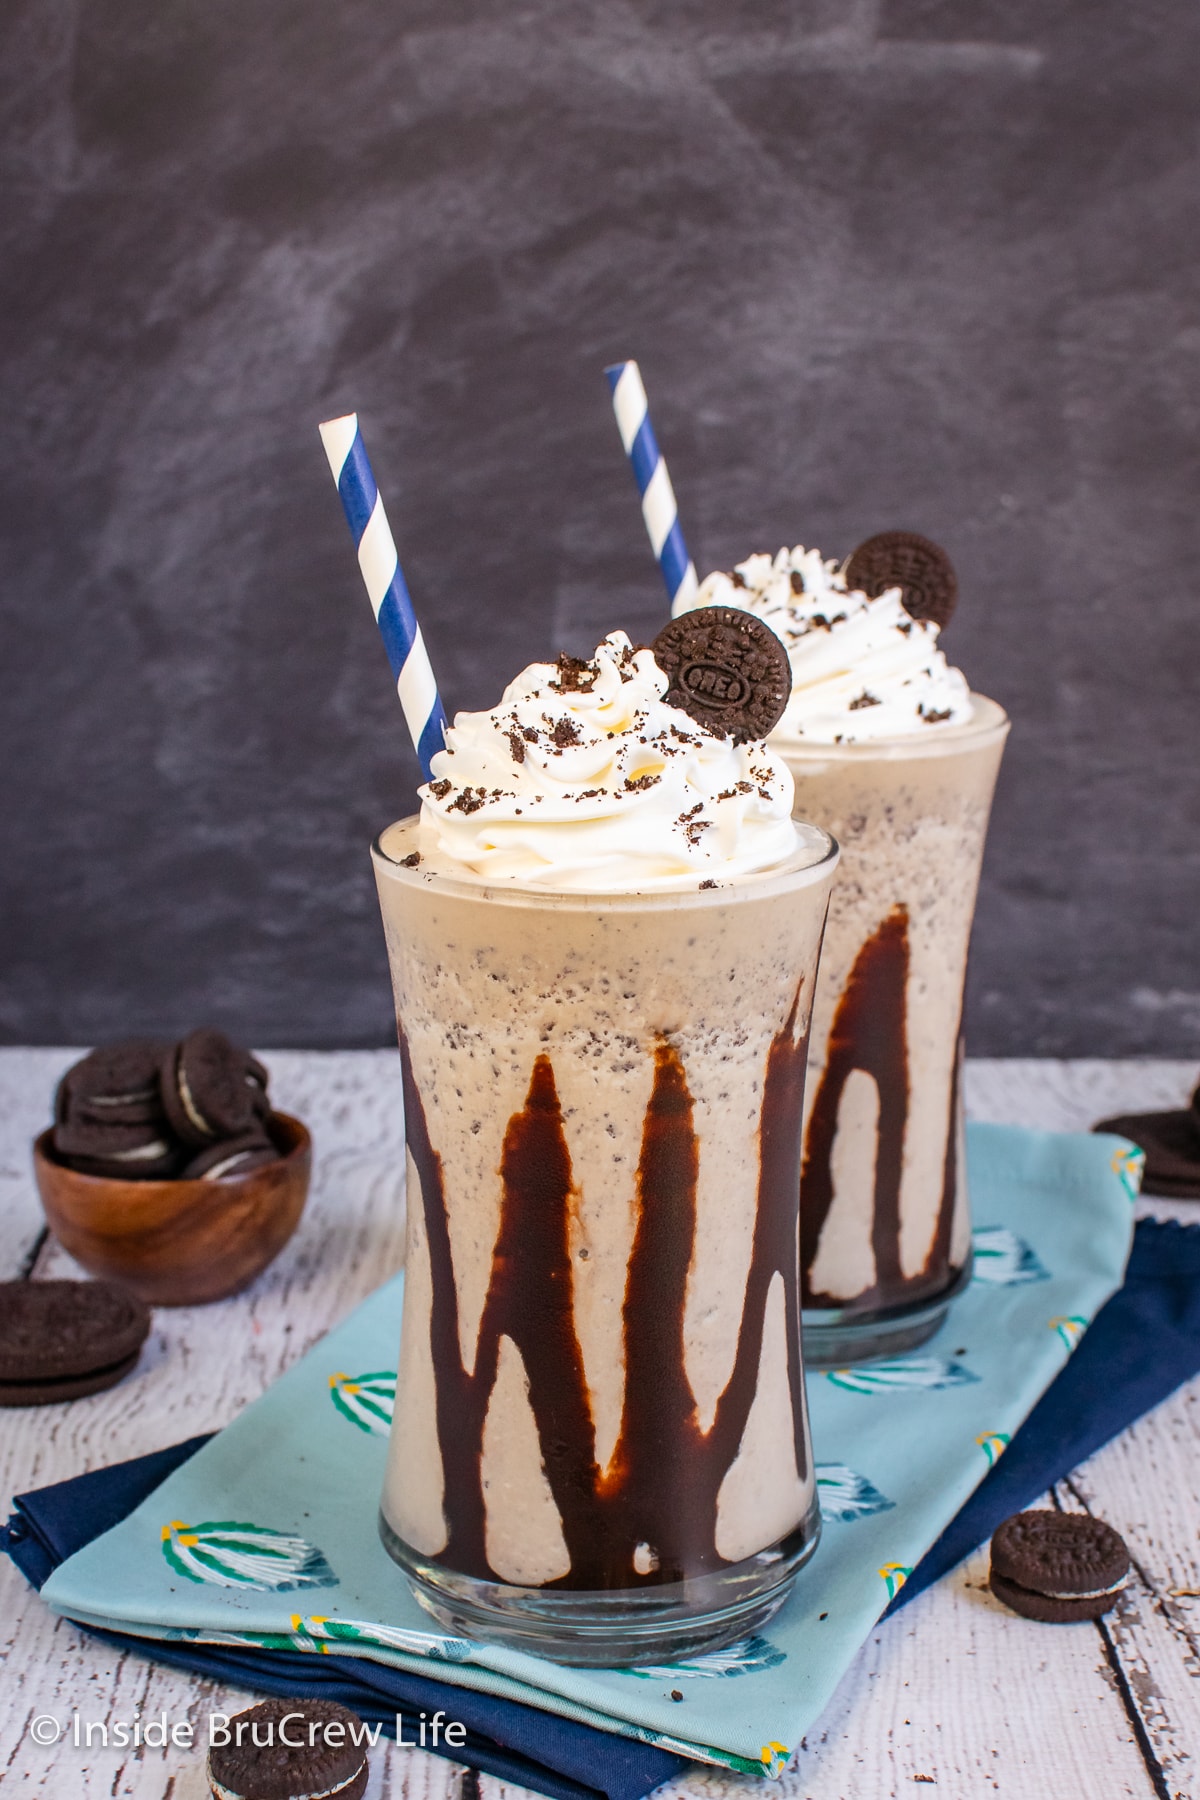 Two clear cups drizzled with chocolate and filled with a cookie shake.